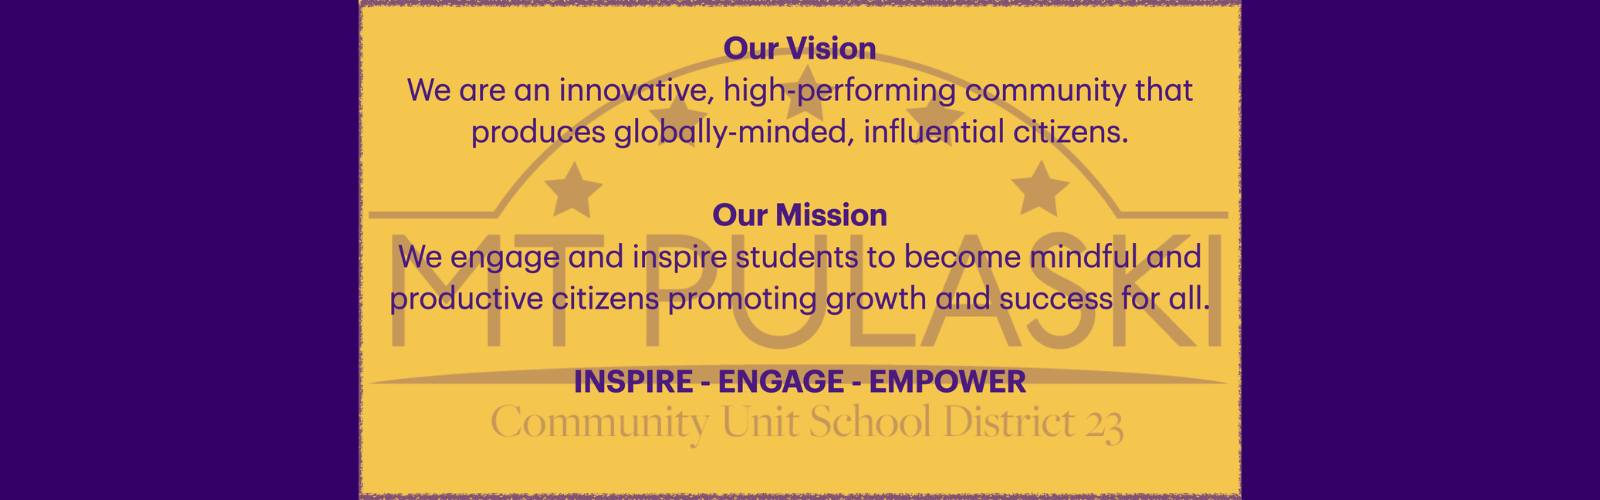 Mission and vision statement can be found on website